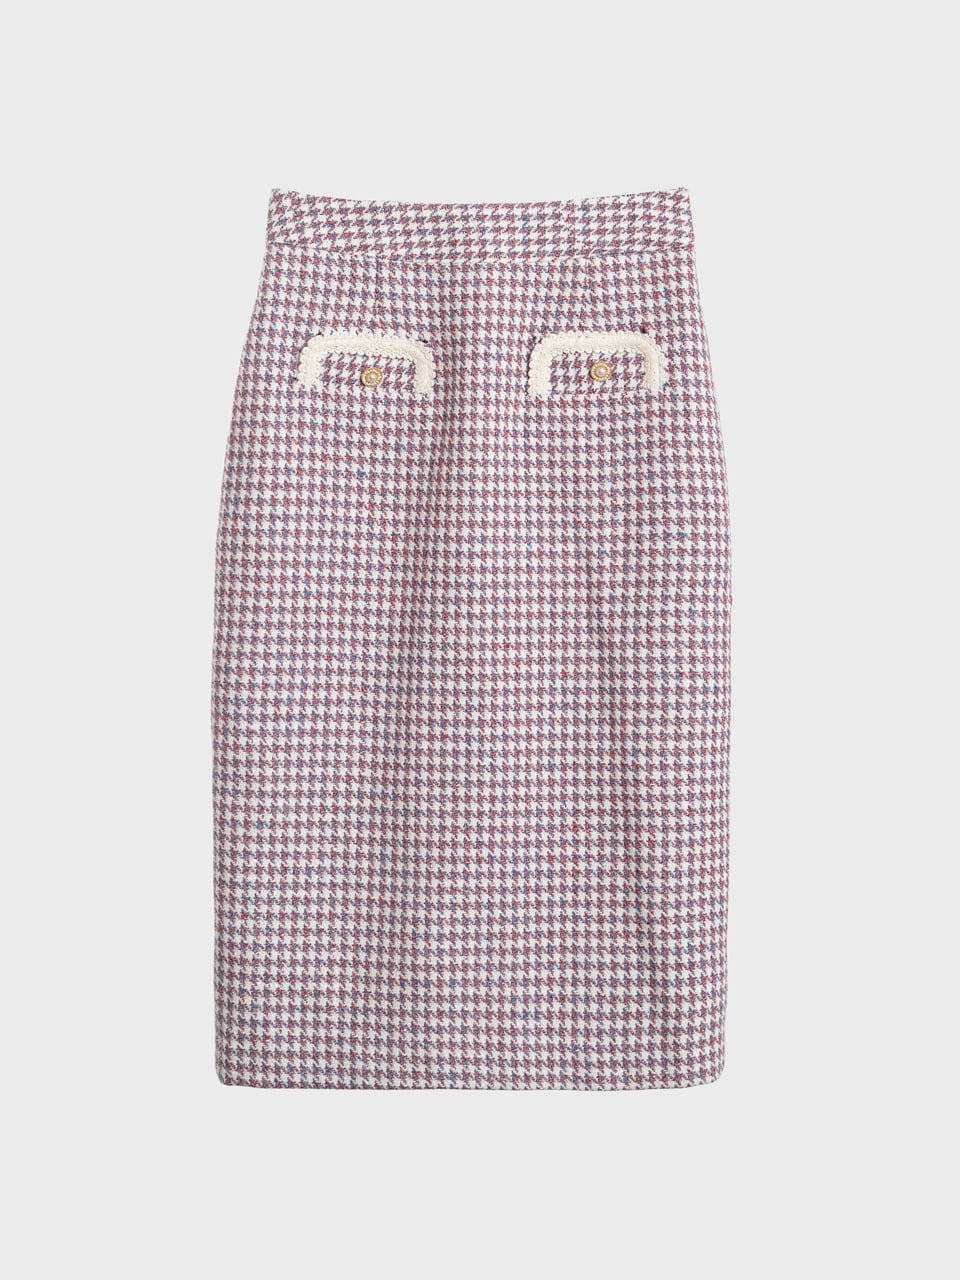 High-rise Houndstooth-Check Tweed Pencil Skirt